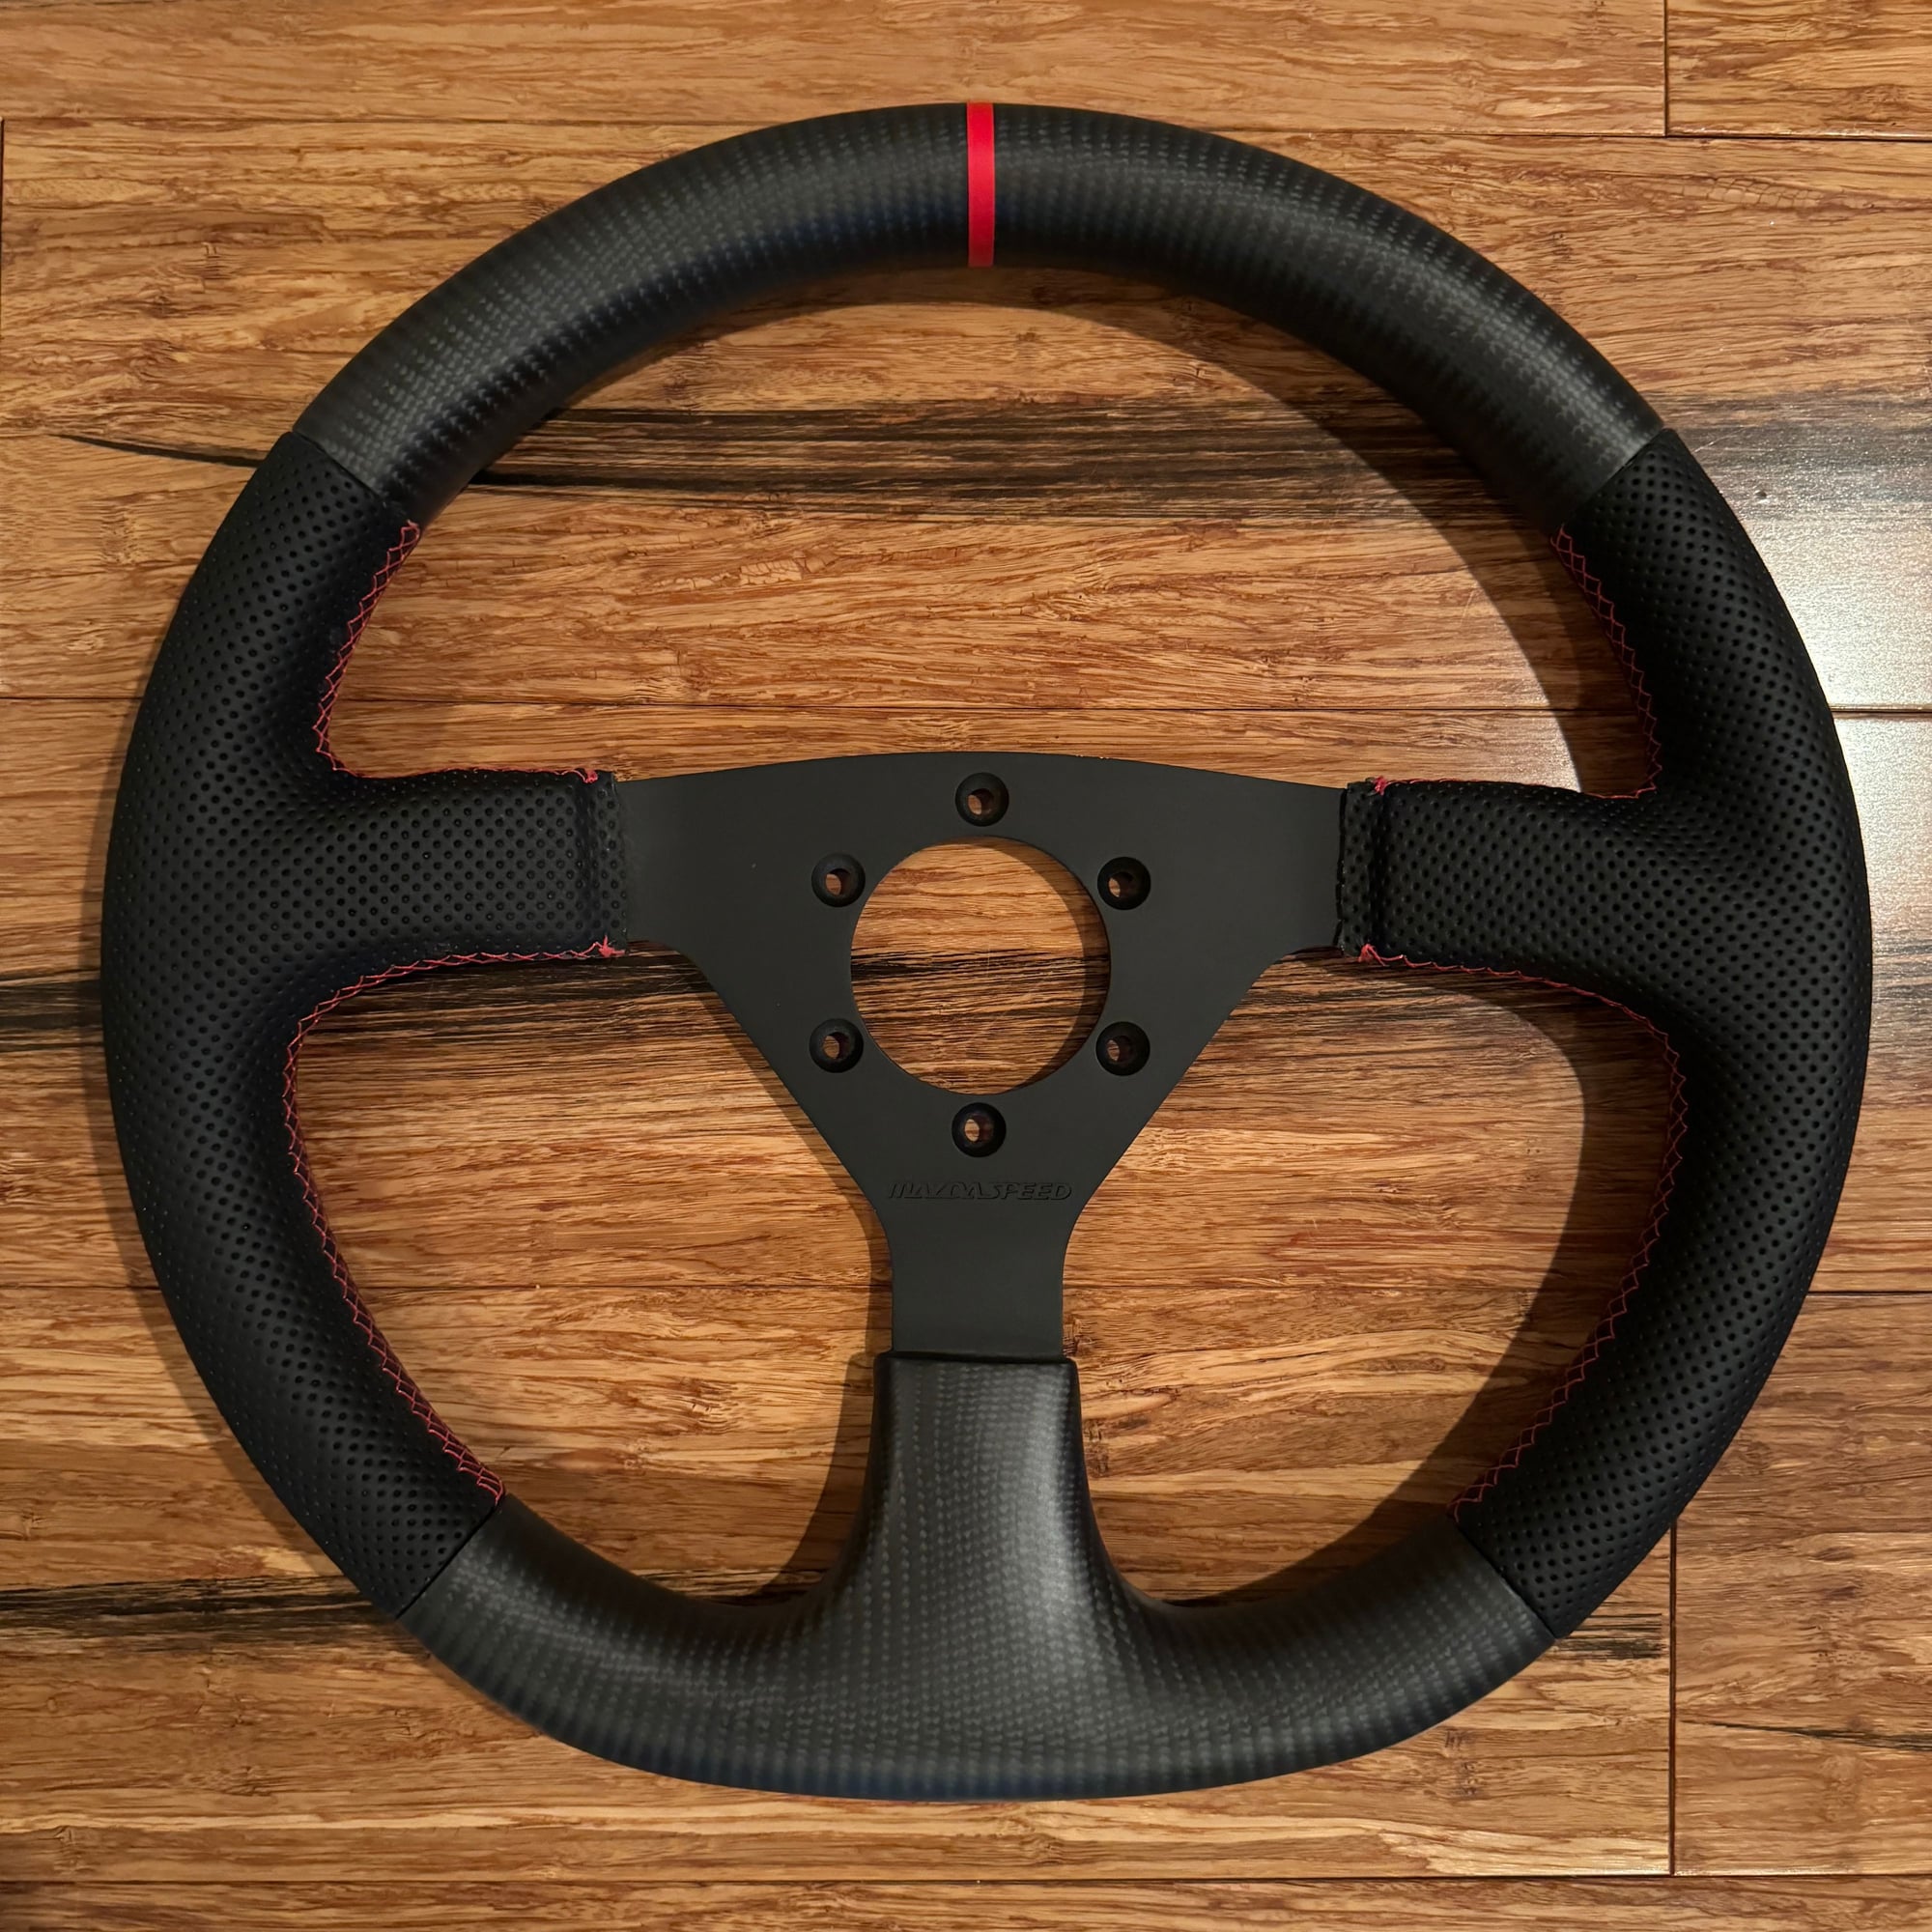 Interior/Upholstery - MAZDASPEED & RE-A Carbon Steering Wheels - New - 1993 to 2002 Mazda RX-7 - Birmingham, MI 48323, United States